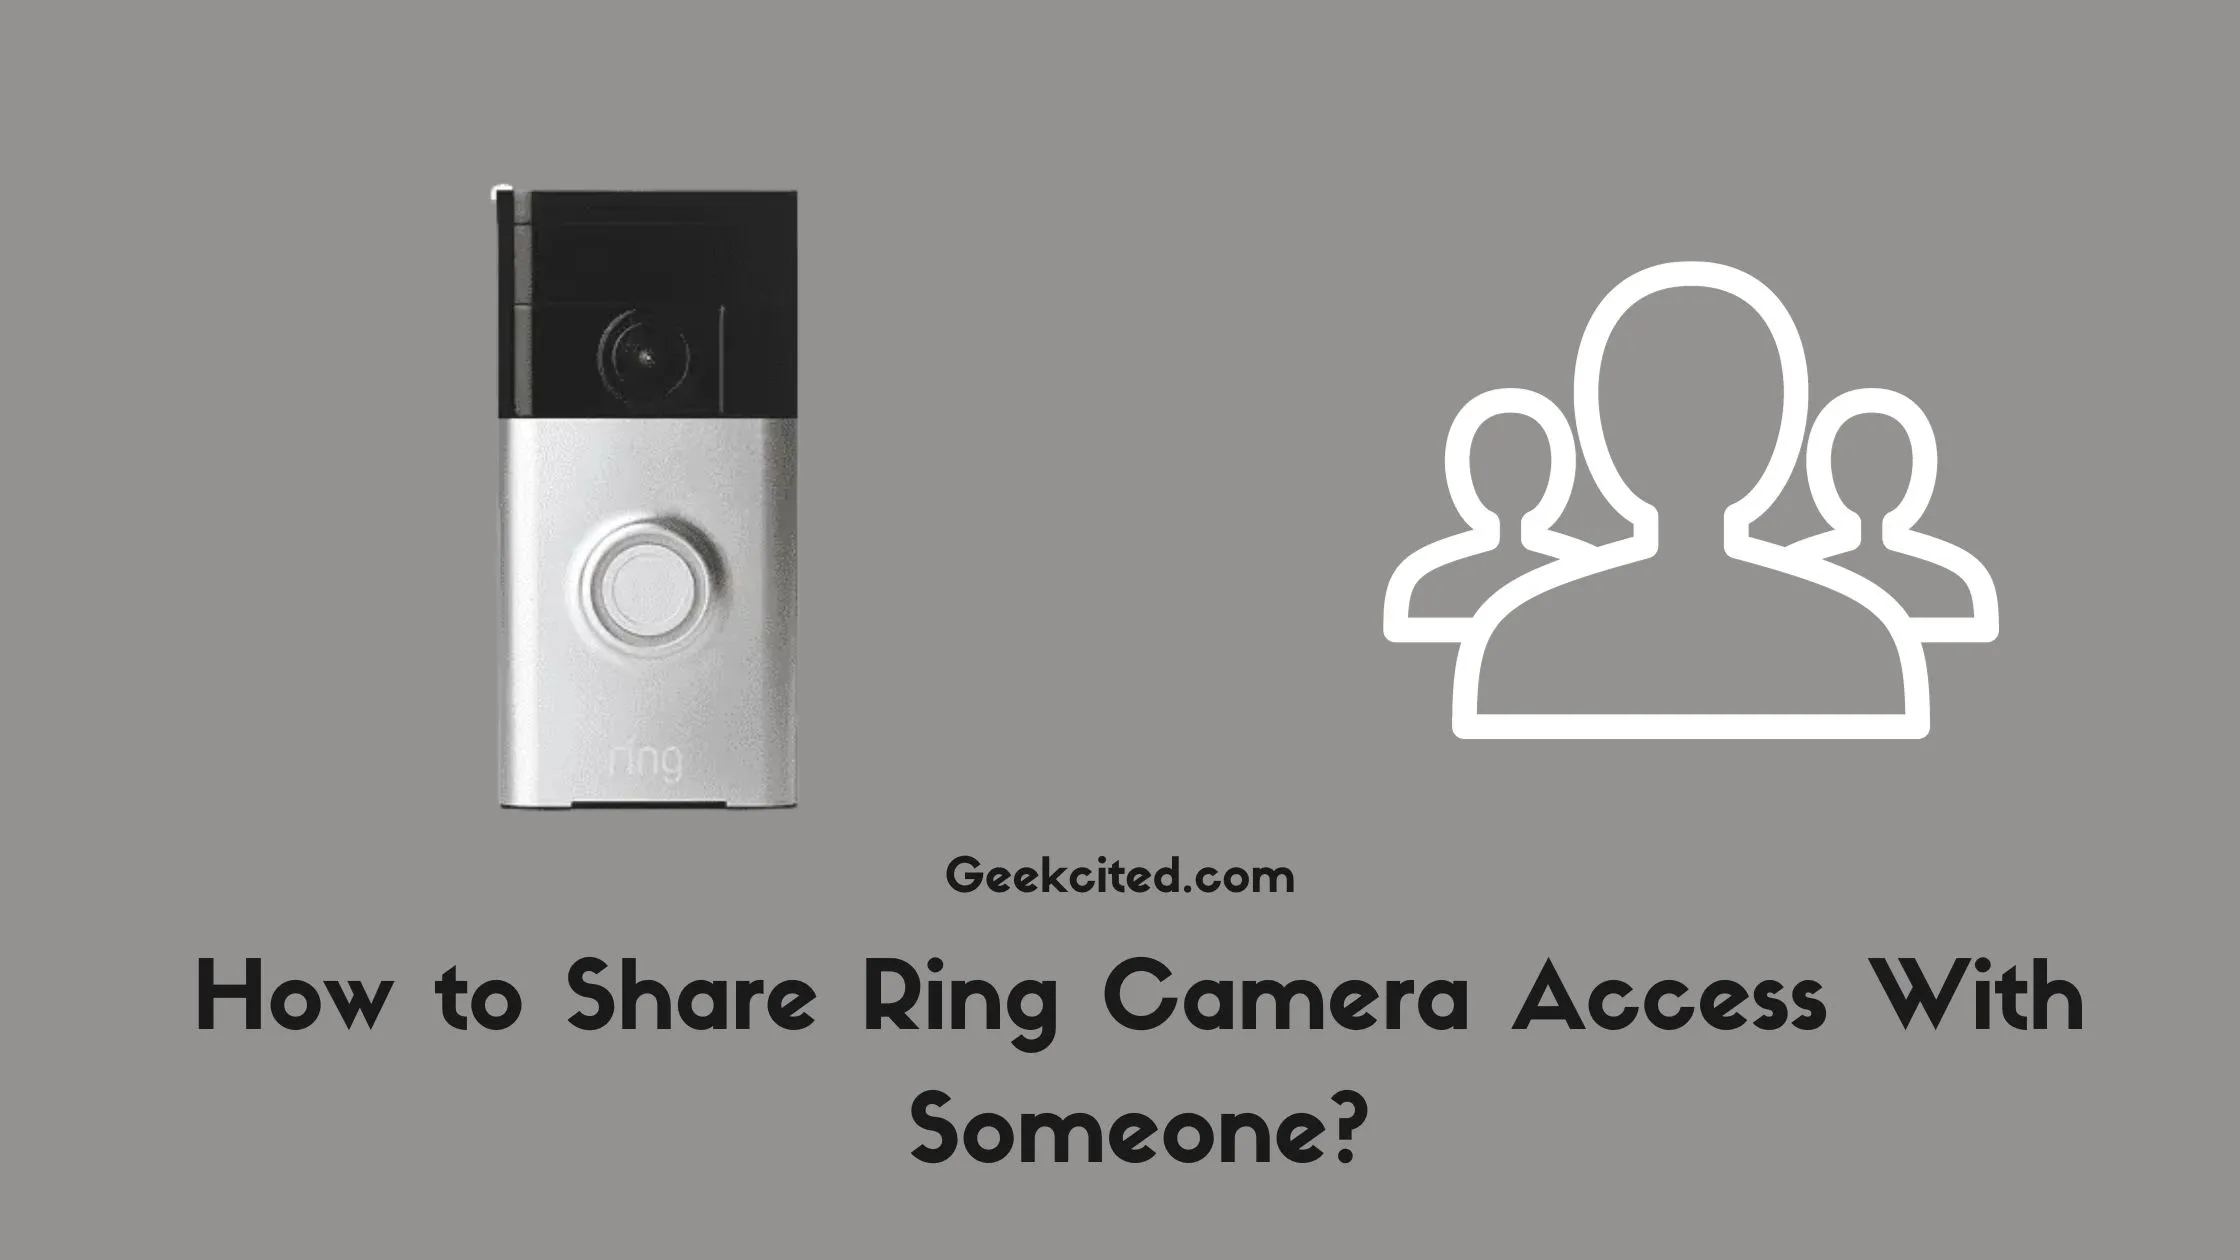 How to Share Ring Camera Access With Someone